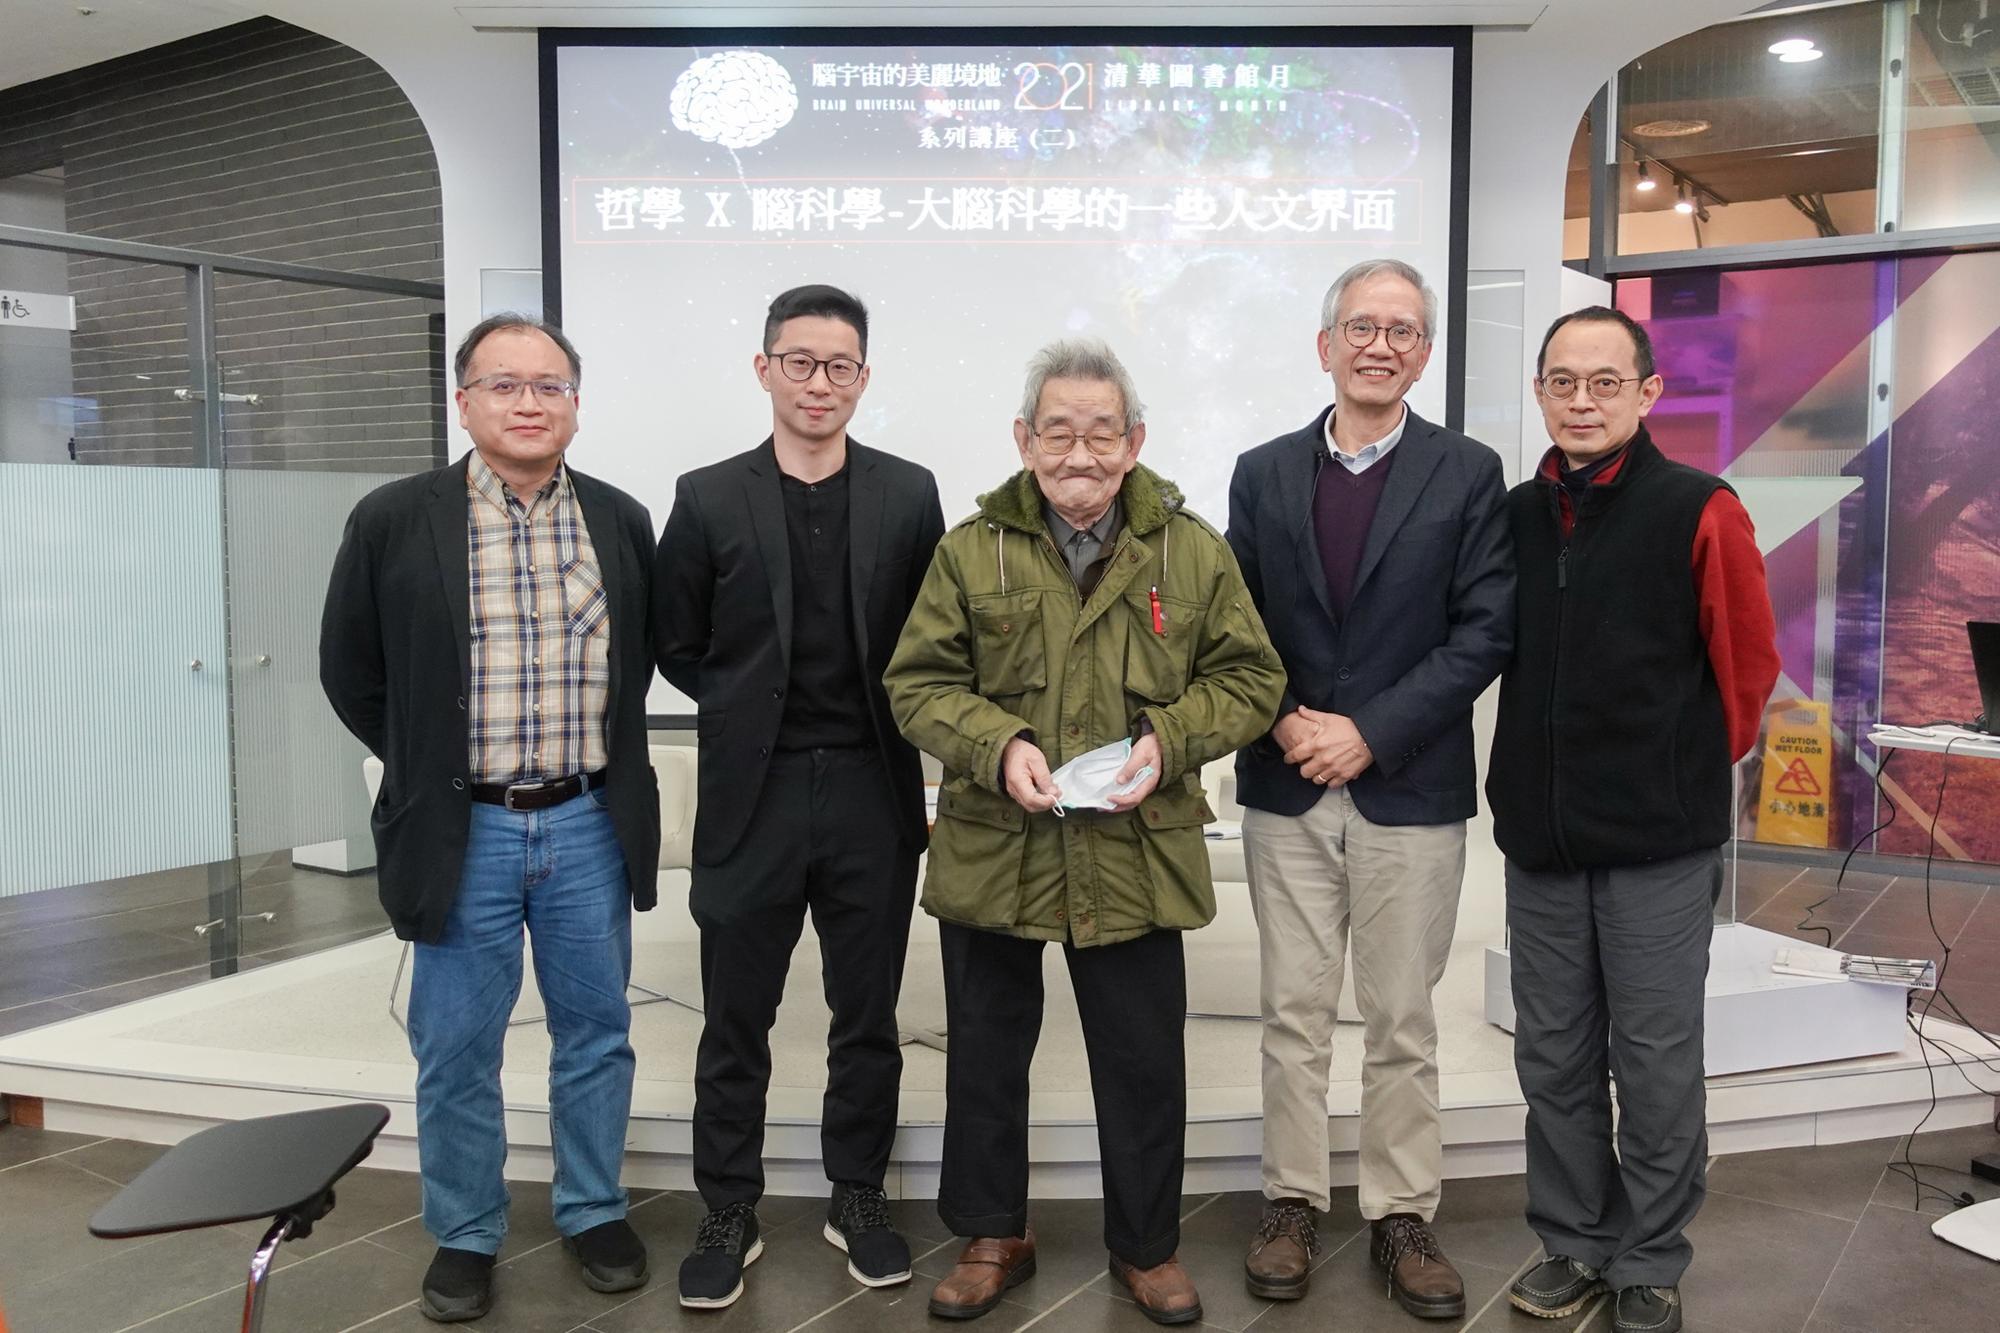 In 2022, Professor Yi-Yan Li (李怡嚴) (3rd left) participated in a neuroscience lecture at the library.